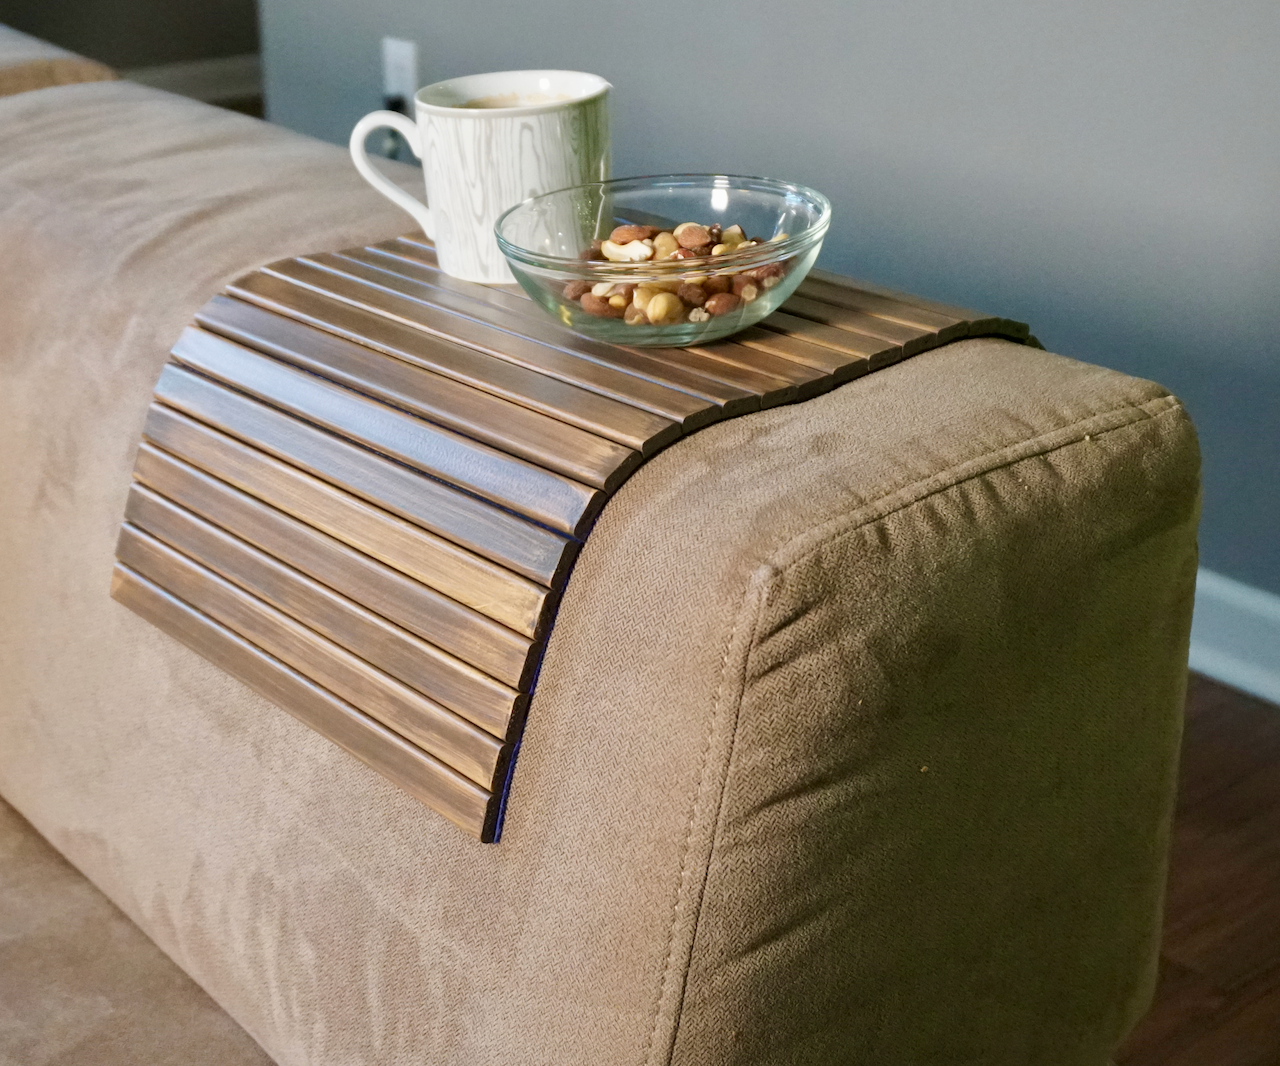 DIY Foldable Wooden Tray for Sofa